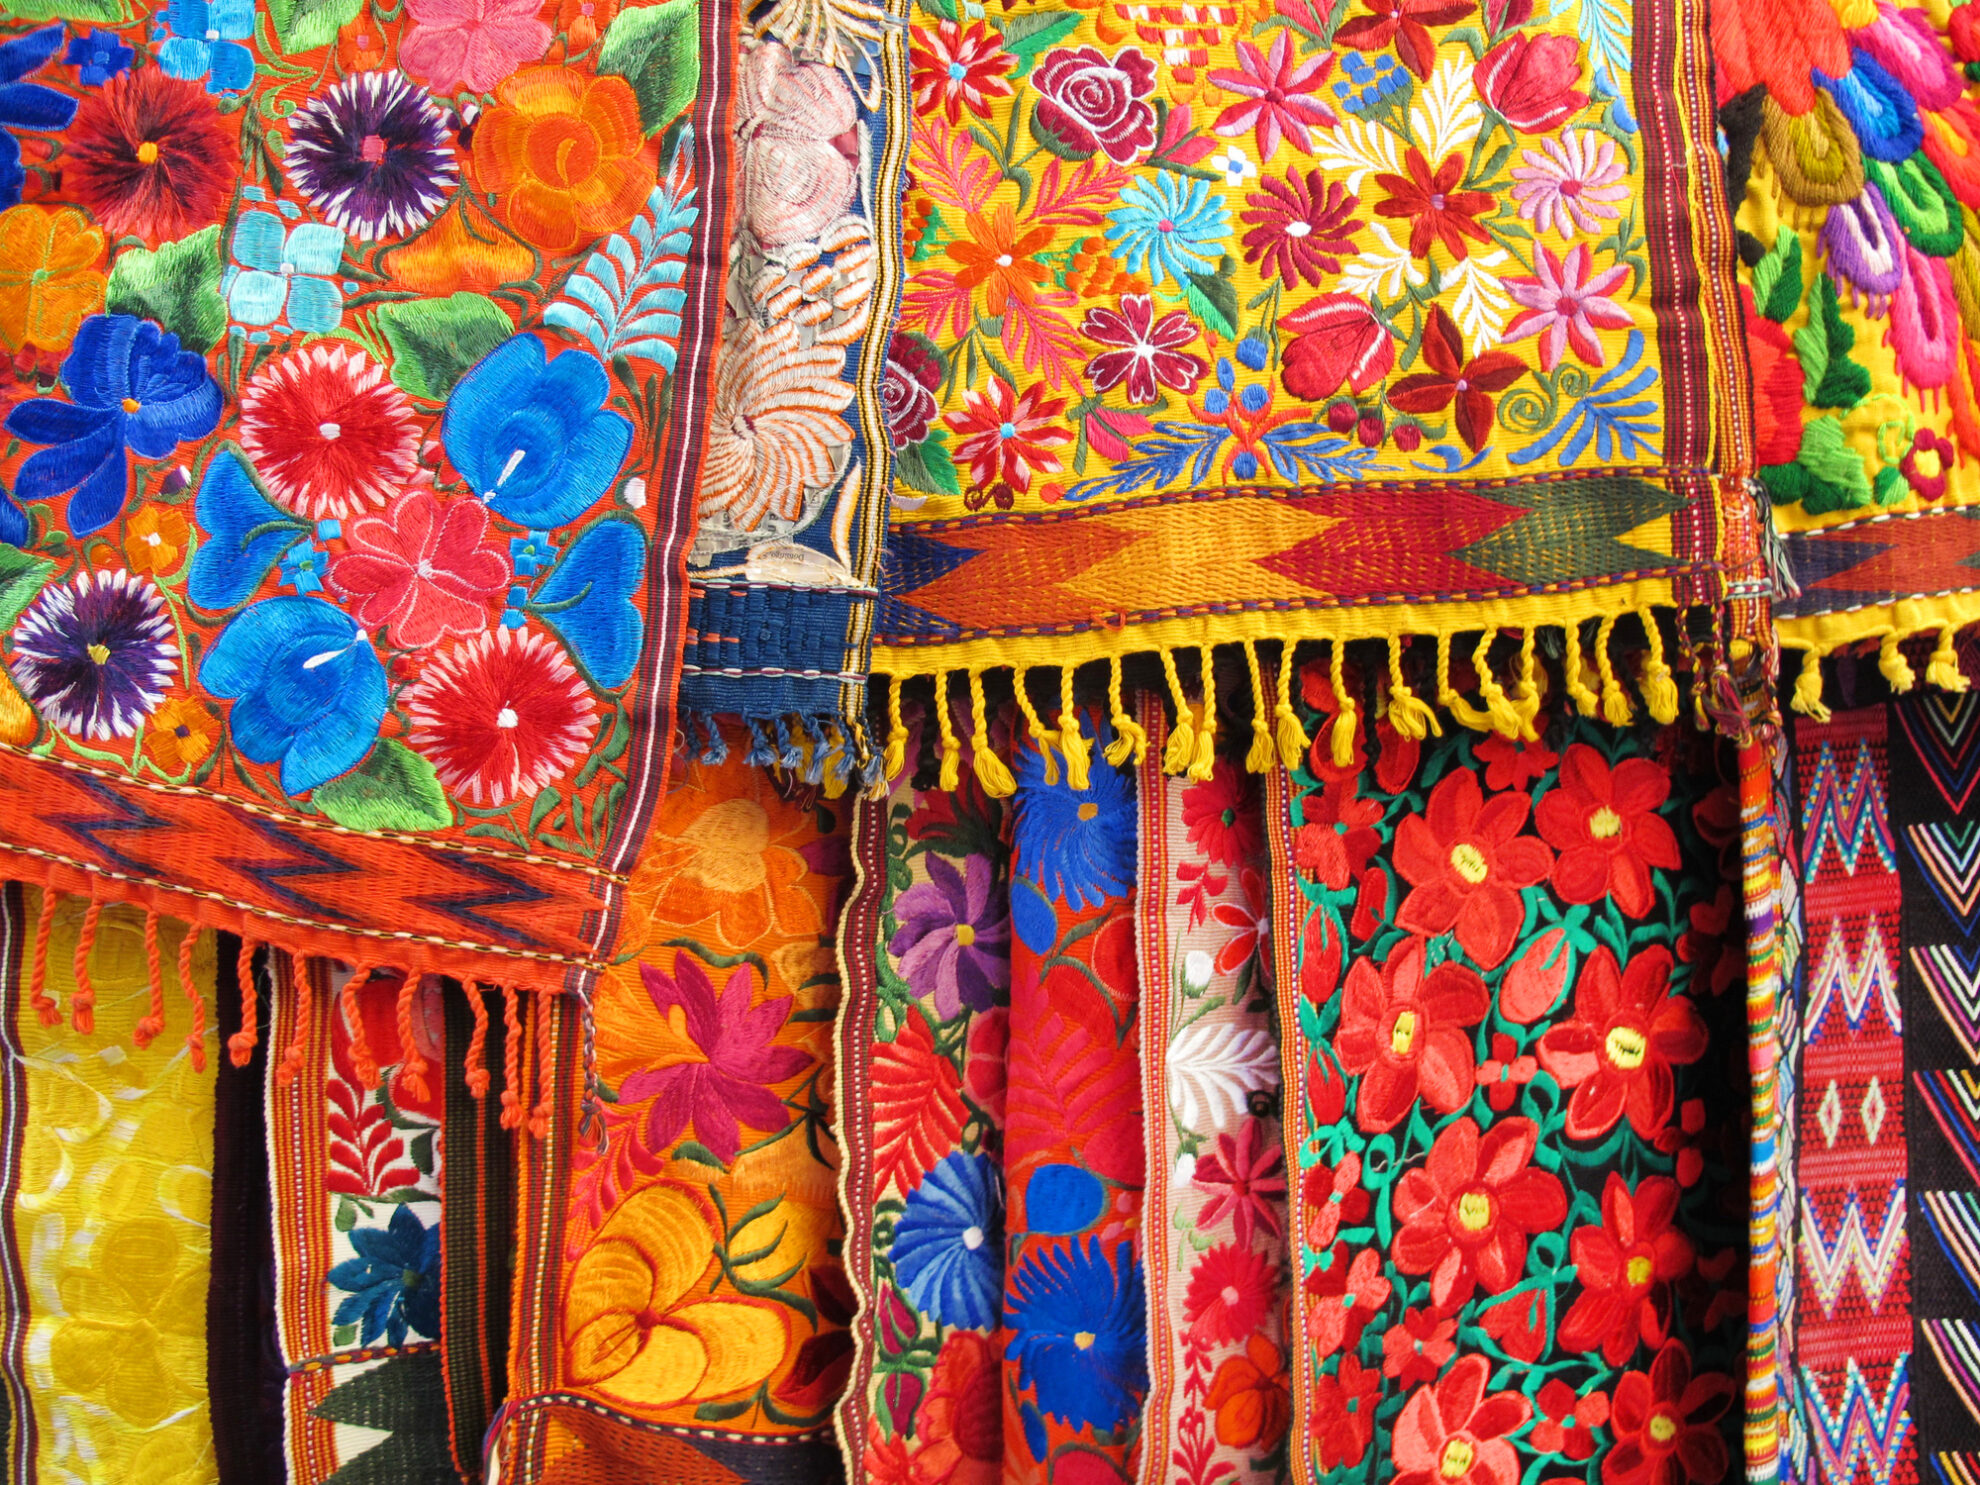 Colorful hand embroidered fabrics and tablecloths in an outdoor market in Mexico City, Mexico